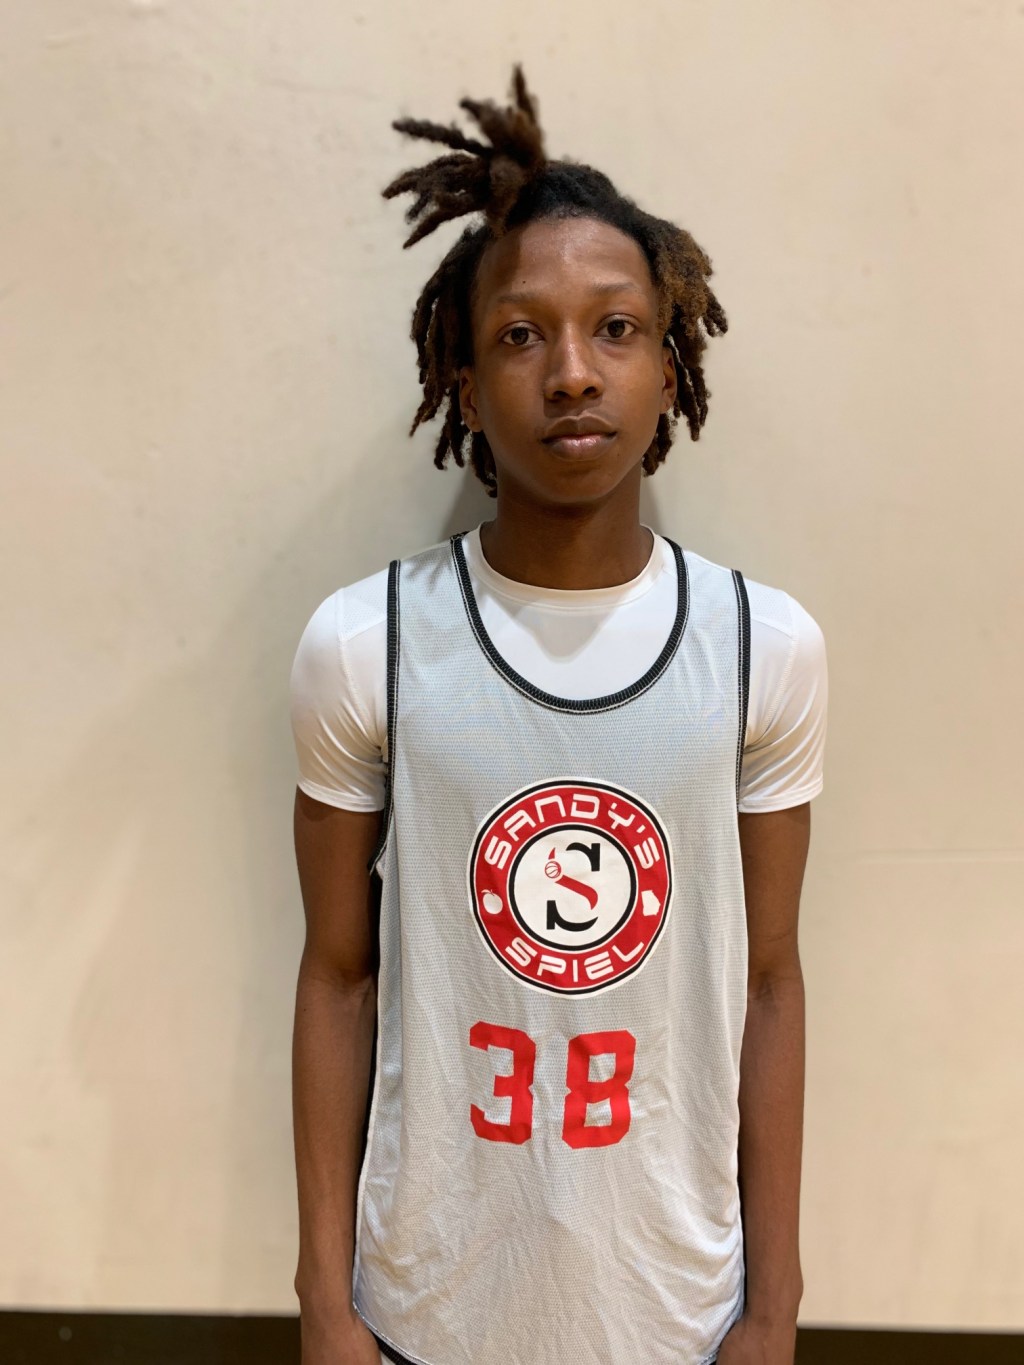 Player Rankings Update: 2025 New Guards